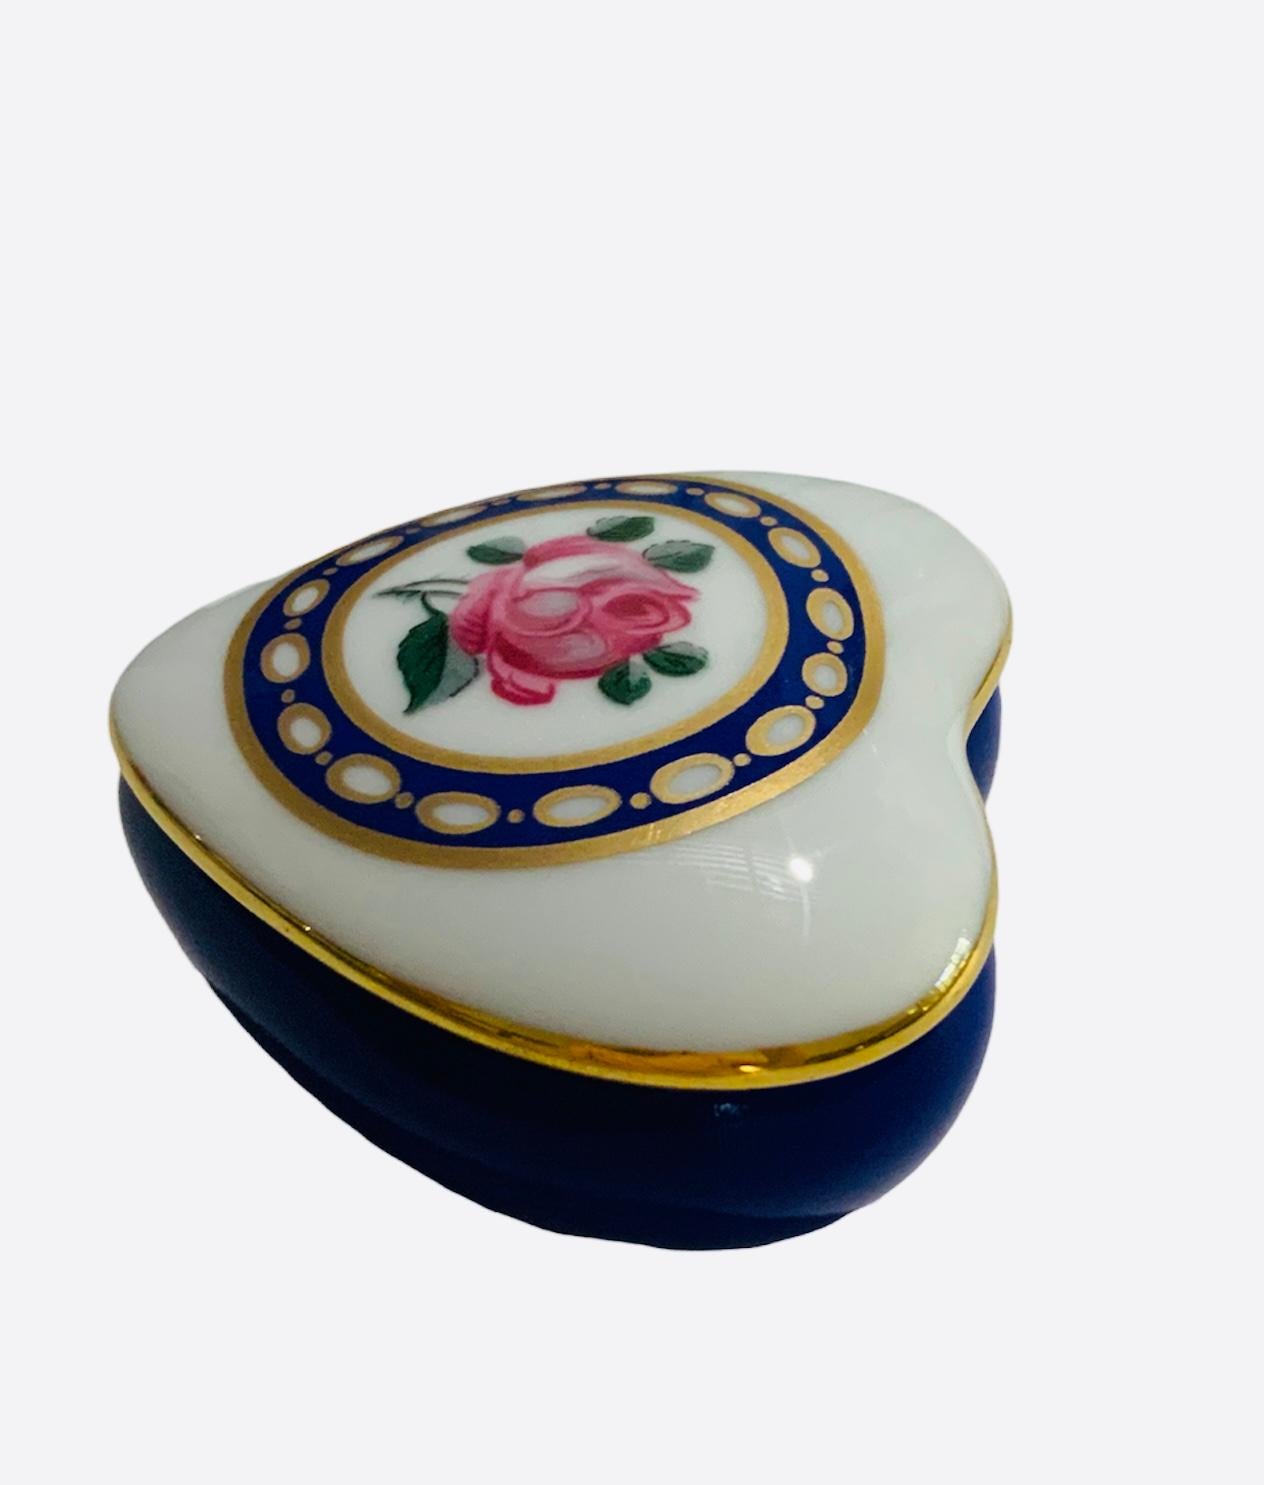 This is a small Limoges France porcelain hand painted lidded trinket box. It is adorned with a rose in the center of its white lid and a gilt royal blue wide circlet with gold rings. Also, there is another rose inside the box. The bottom of the box